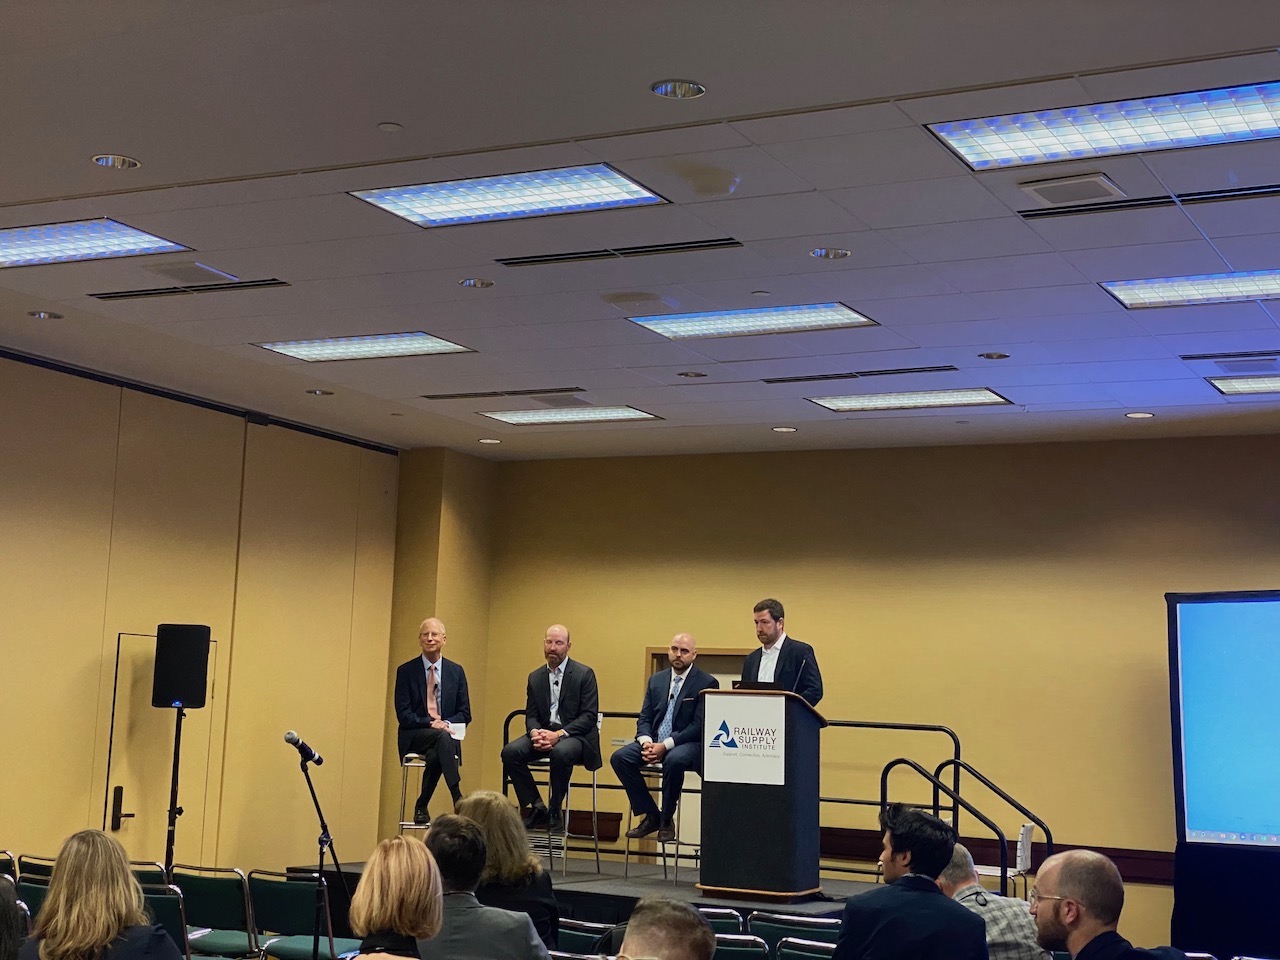 From Left to Right: David Carol, CEO, APTA; Greg Regan, TTD, AFL/CIO; Harrison M. Wadsworth, Vice President, Government Relations, AECOM; and Mike Friedberg, Partner, Holland & Knight.